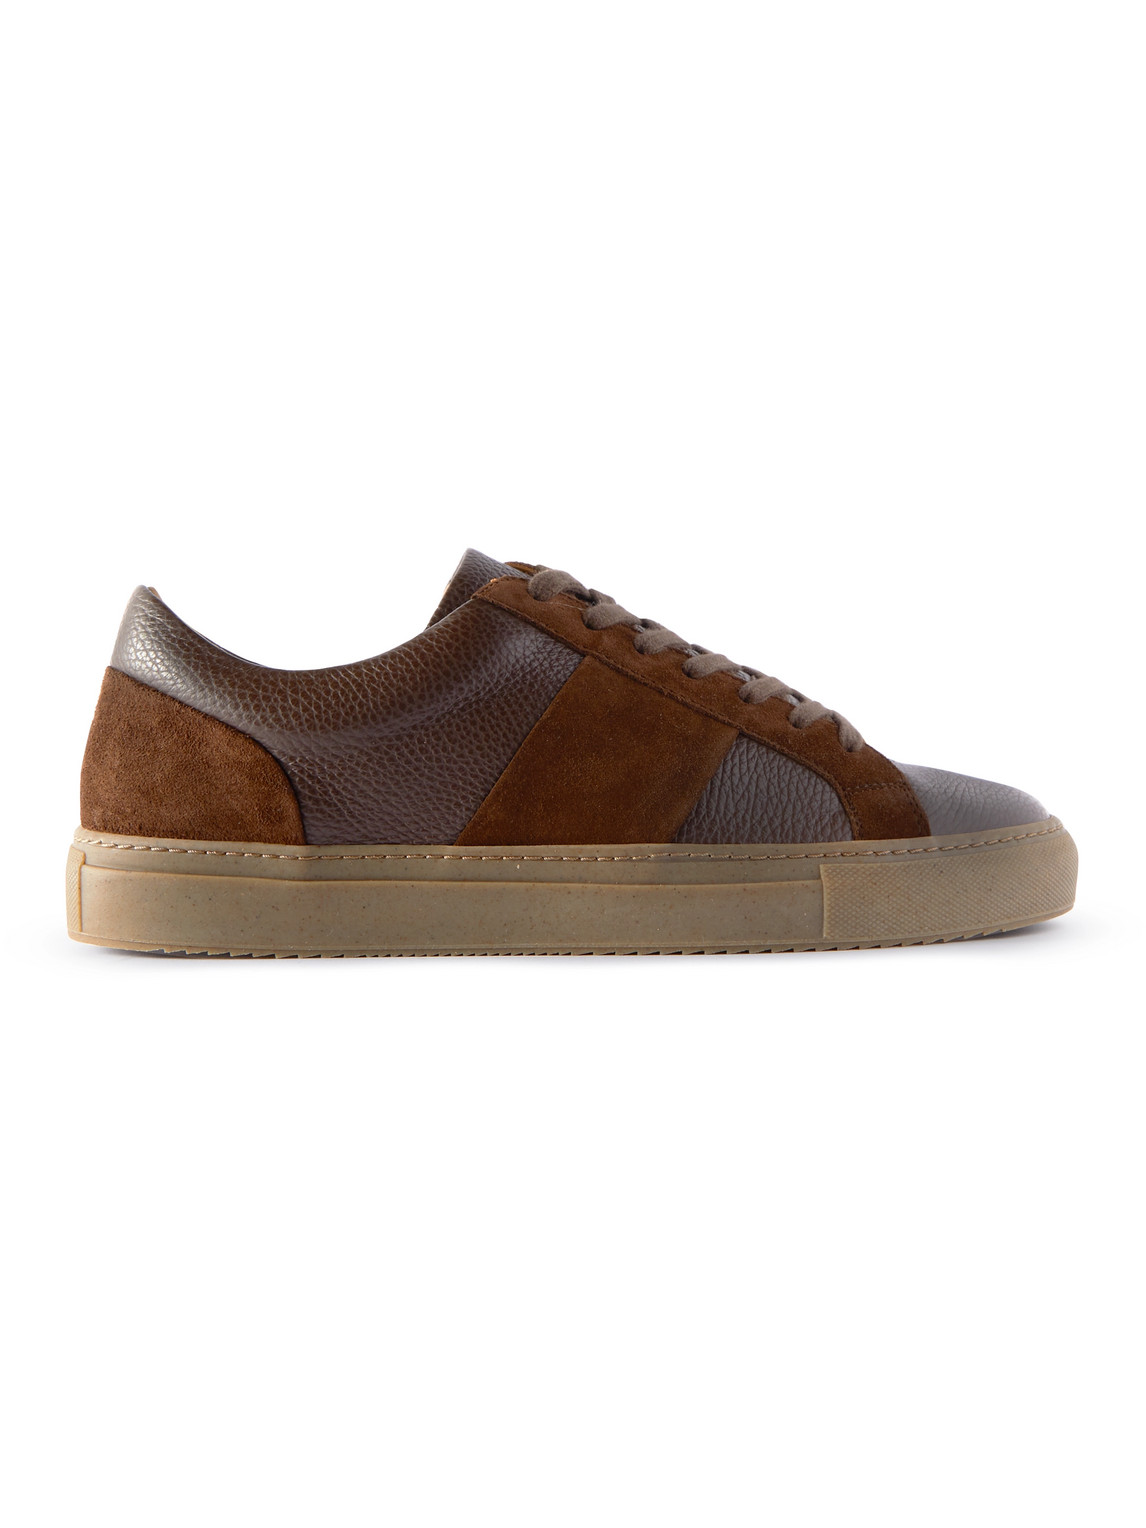 Mr P. Larry Regenerated Suede By Evolo® And Full-grain Leather Sneakers In Brown